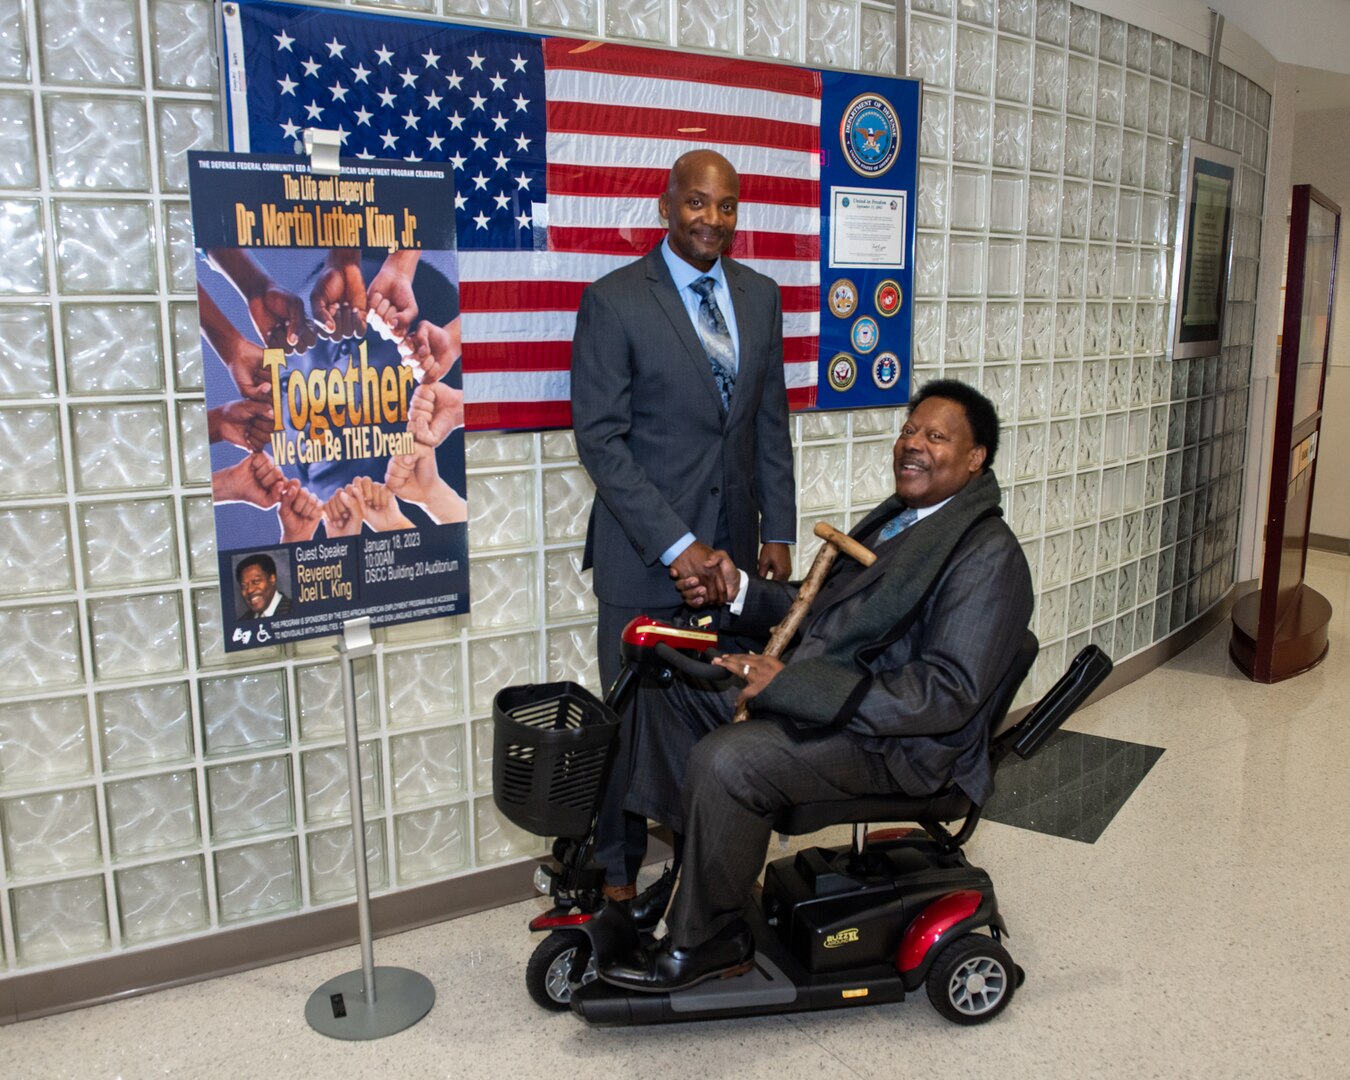 Two dark skinned men shake hands in a hallway. One is seated in a scooter and the other is standing.